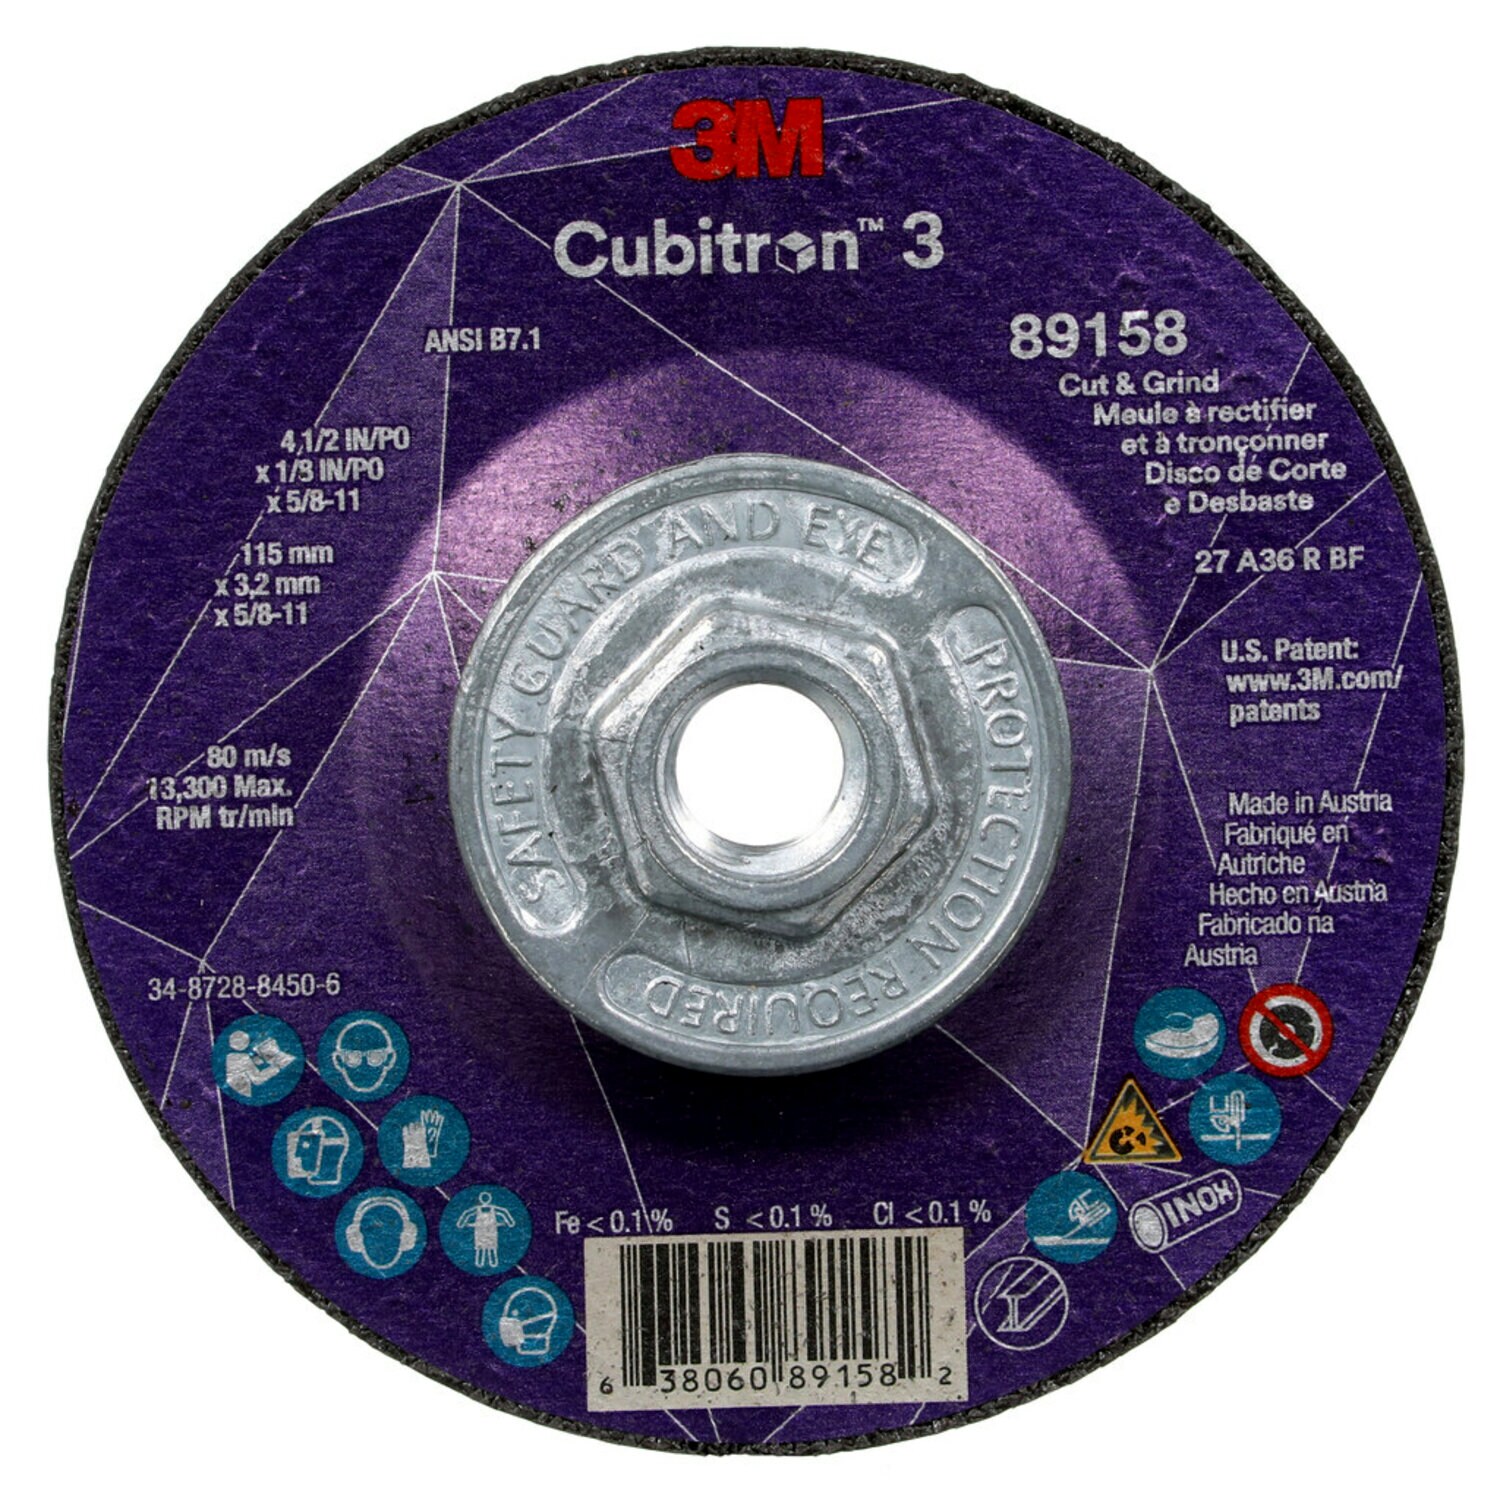 7100313760 - 3M Cubitron 3 Cut and Grind Wheel, 89158, 36+, T27, 4-1/2 in x 1/8 in
x 5/8 in-11 (115 x 3.2 mm x 5/8-11 in), ANSI, 10 ea/Case